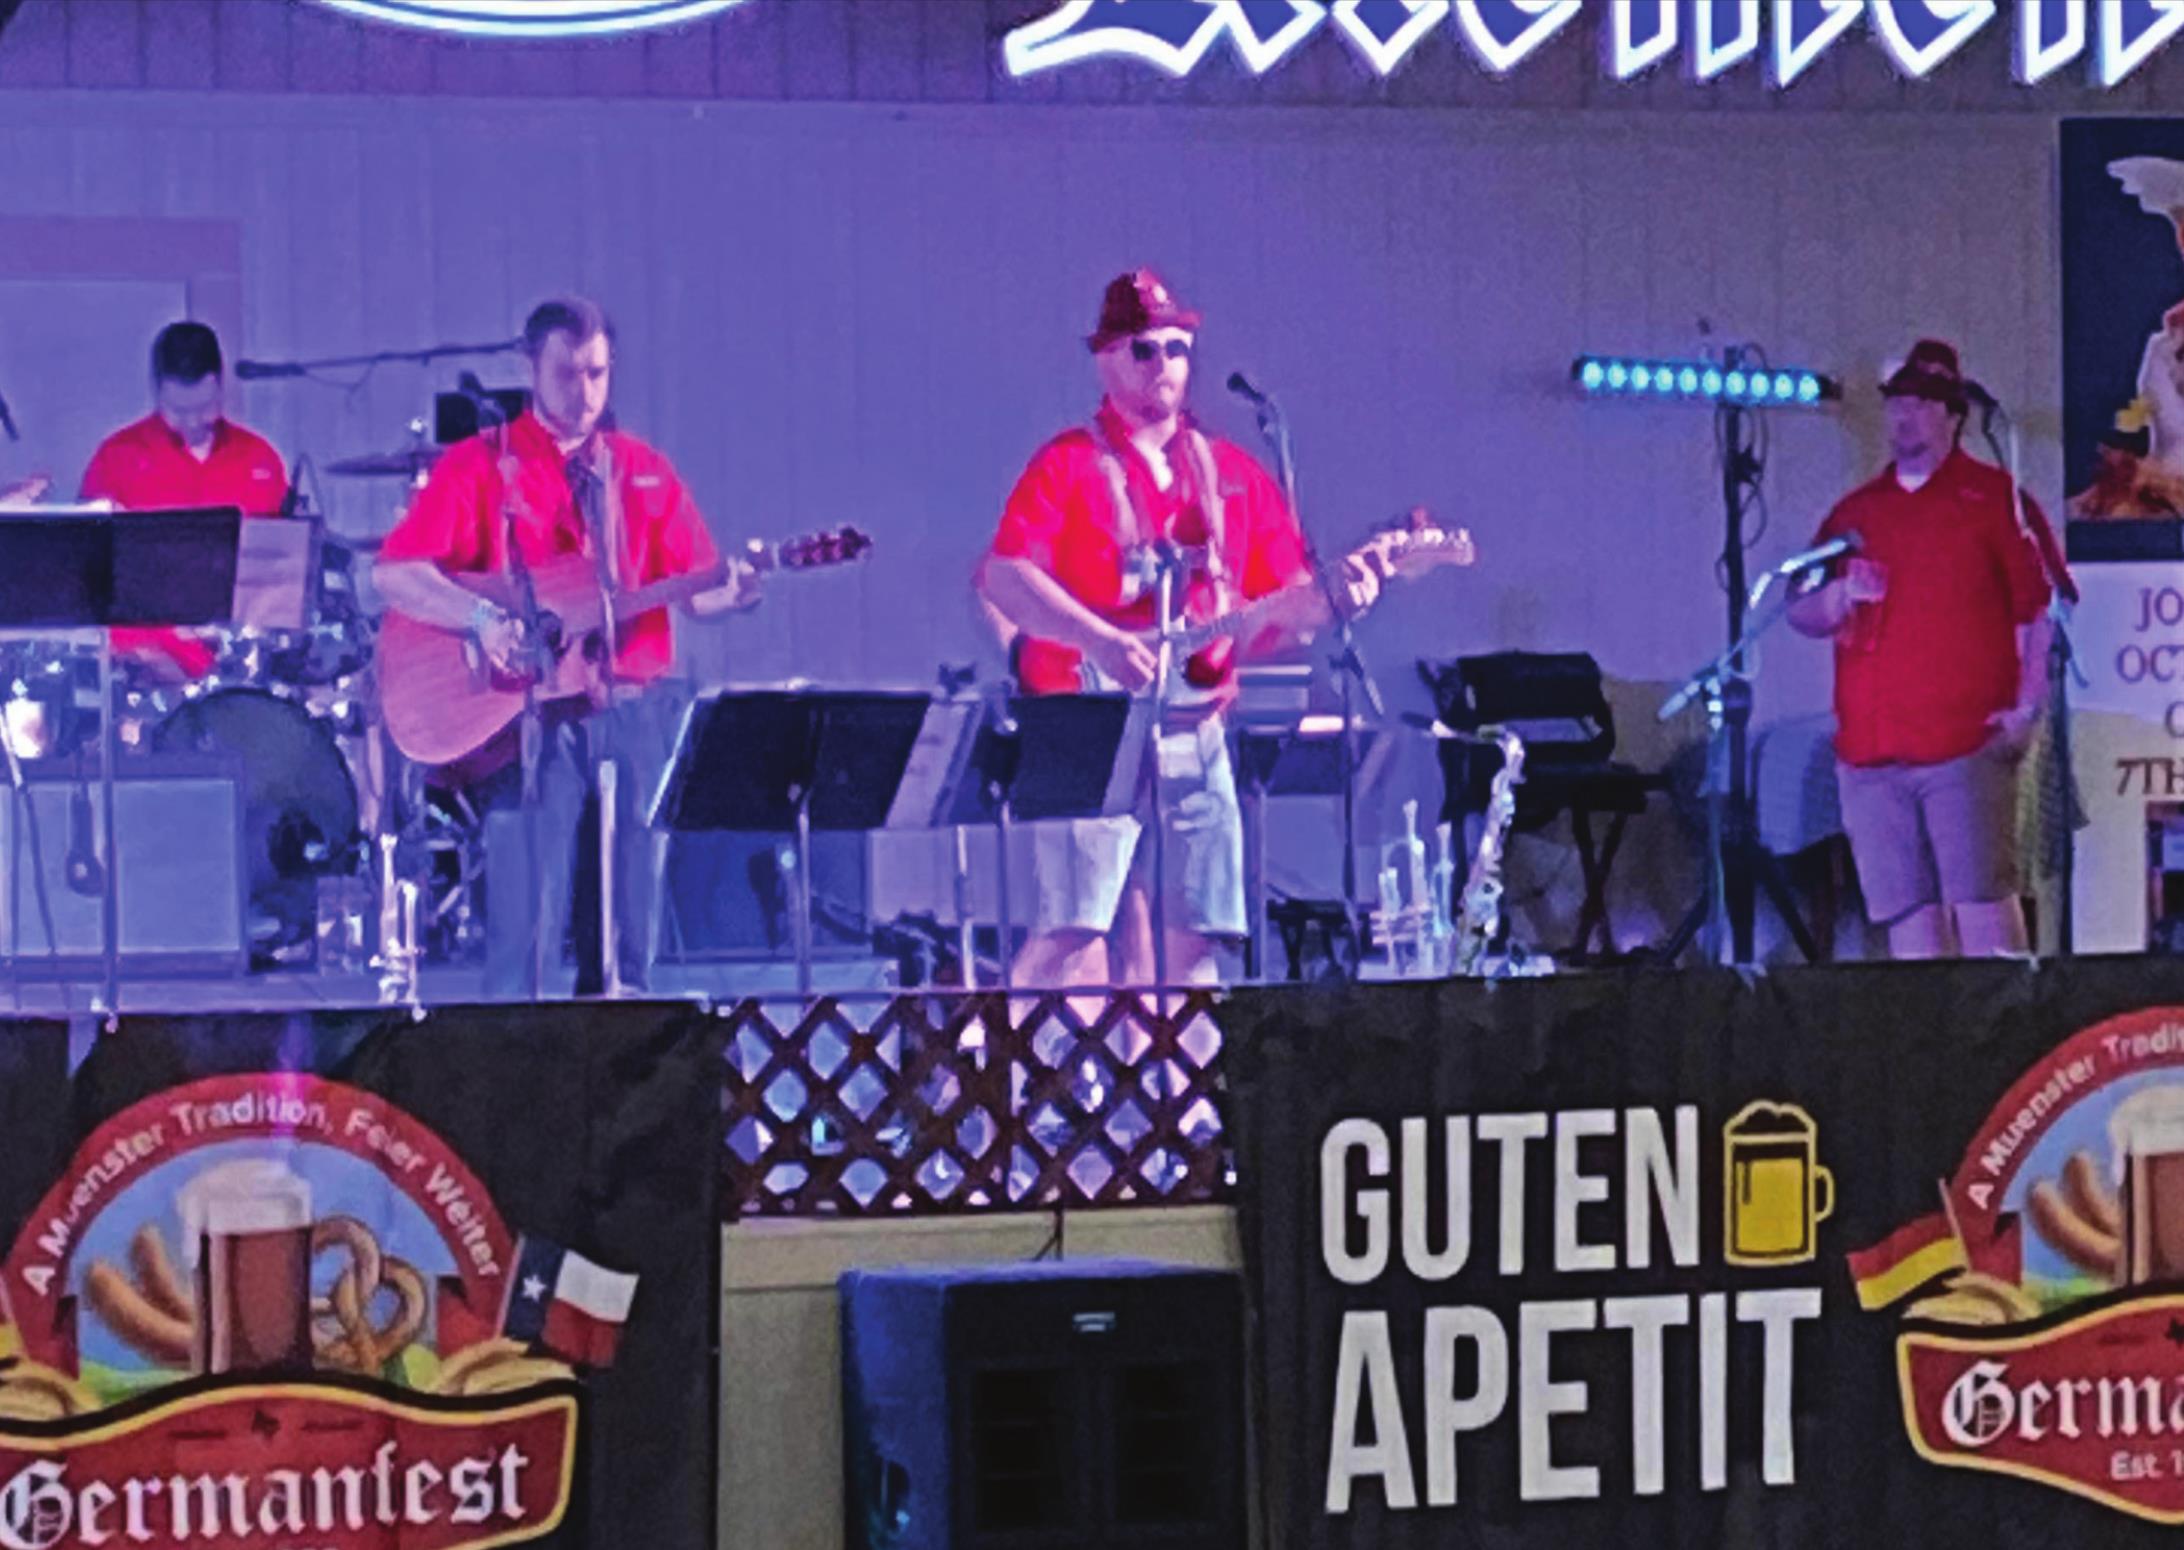 German Fest a wunderbar experience Madill Record